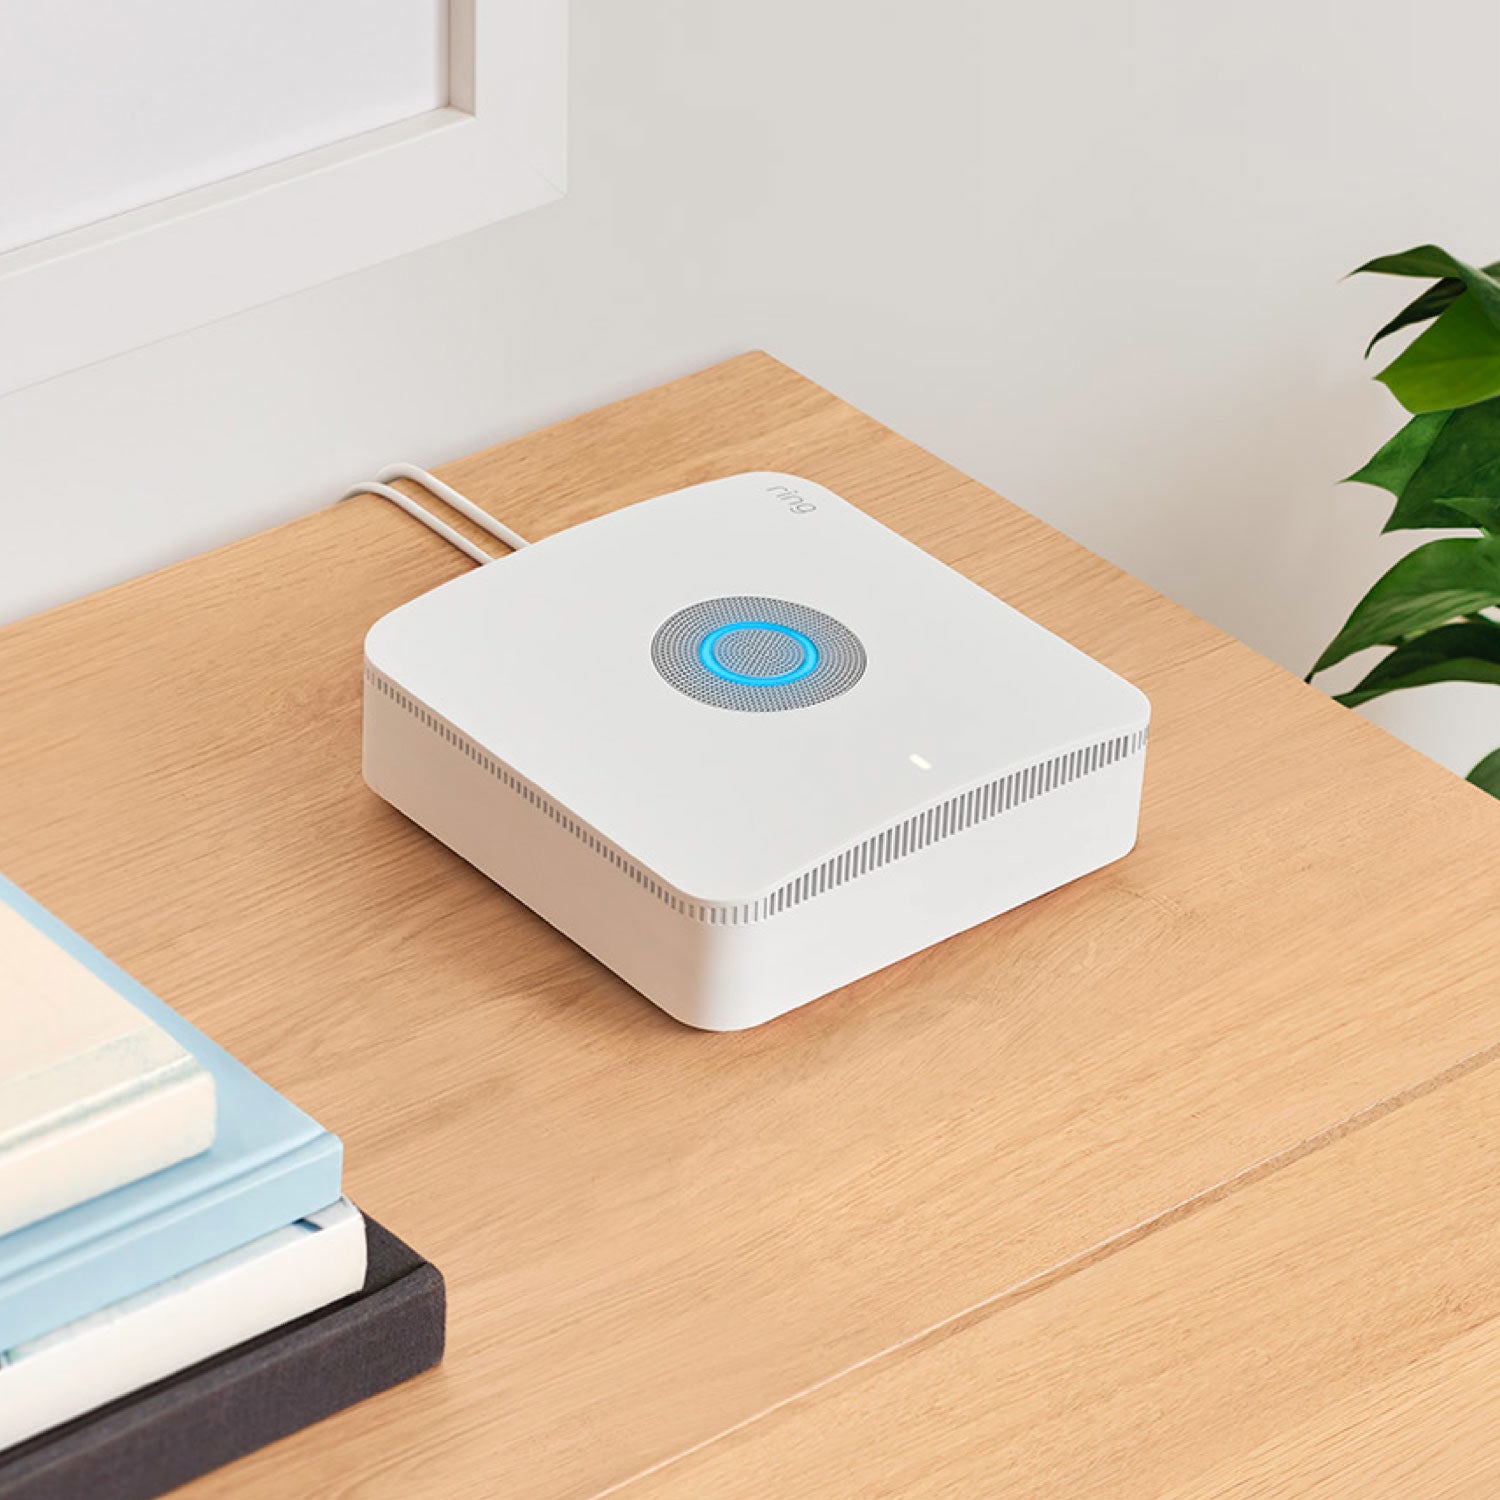 Alarm Pro Security Kit, 8-Piece (with built-in eero Wi-Fi 6 router) - Alarm Pro Base Station situated on wooden desktop next to some books.